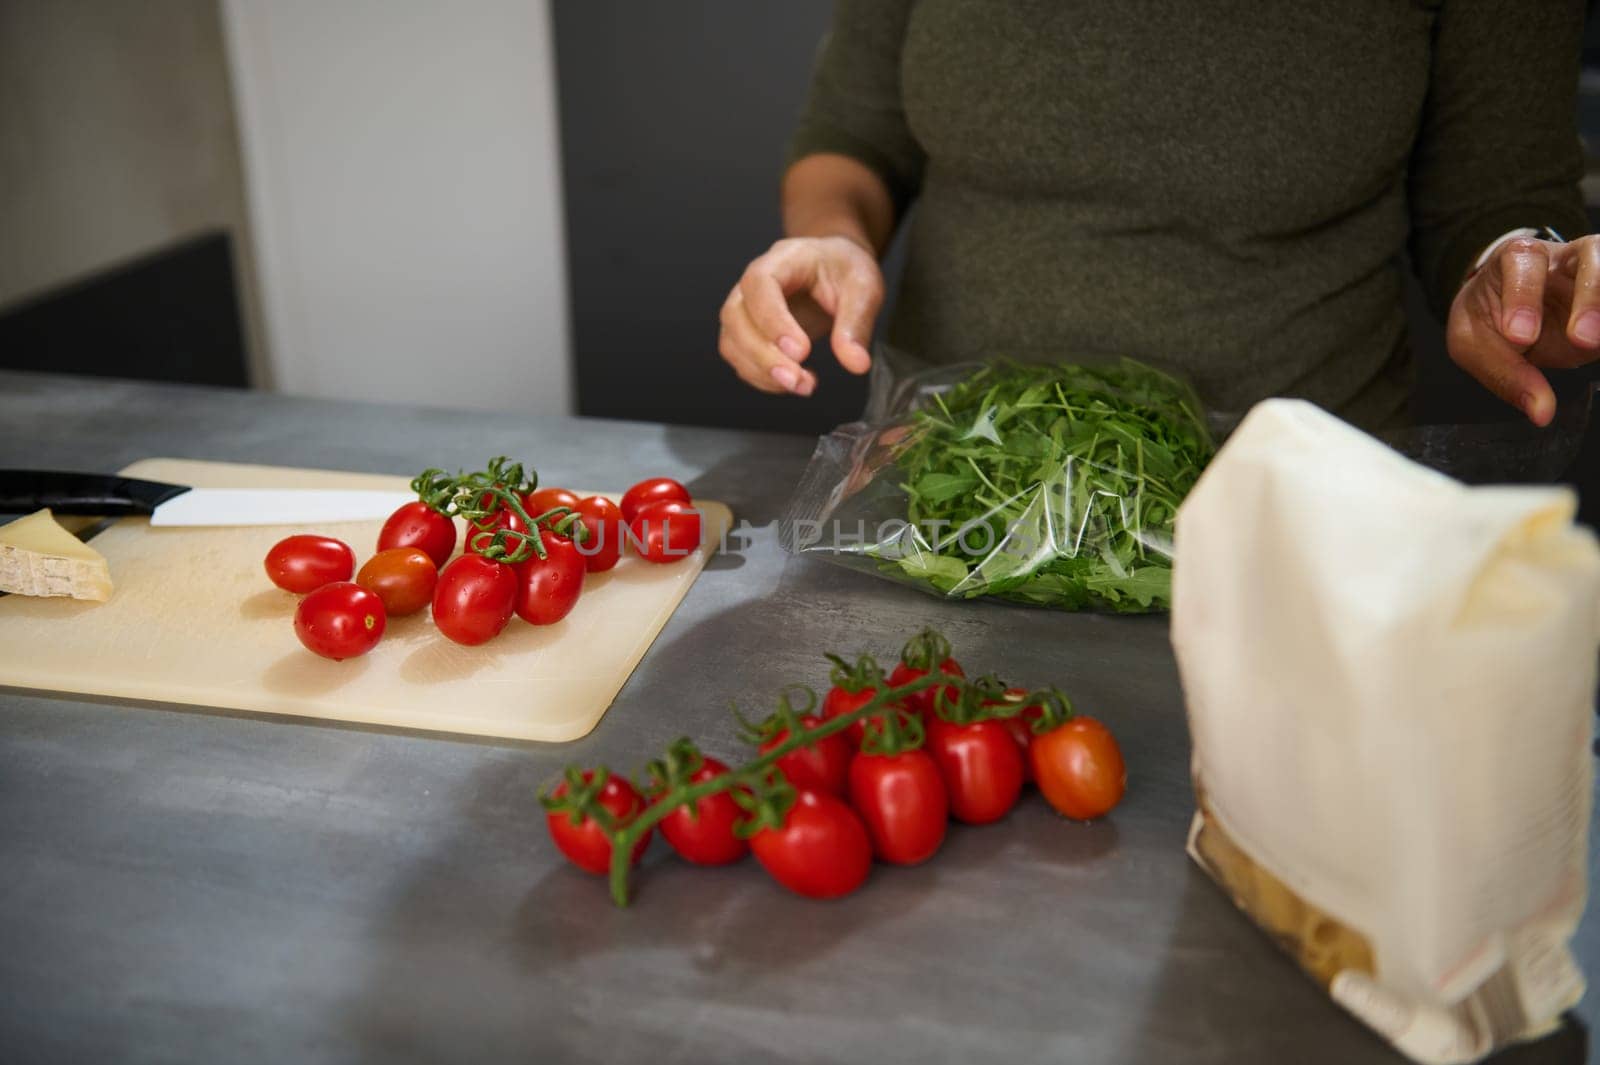 Fresh bunch of tomato cherry, arugula leaves and raw Italian pasta in paper packet on the kitchen table. Healthy eating, culinary, diet concept. Copy space for advertising text